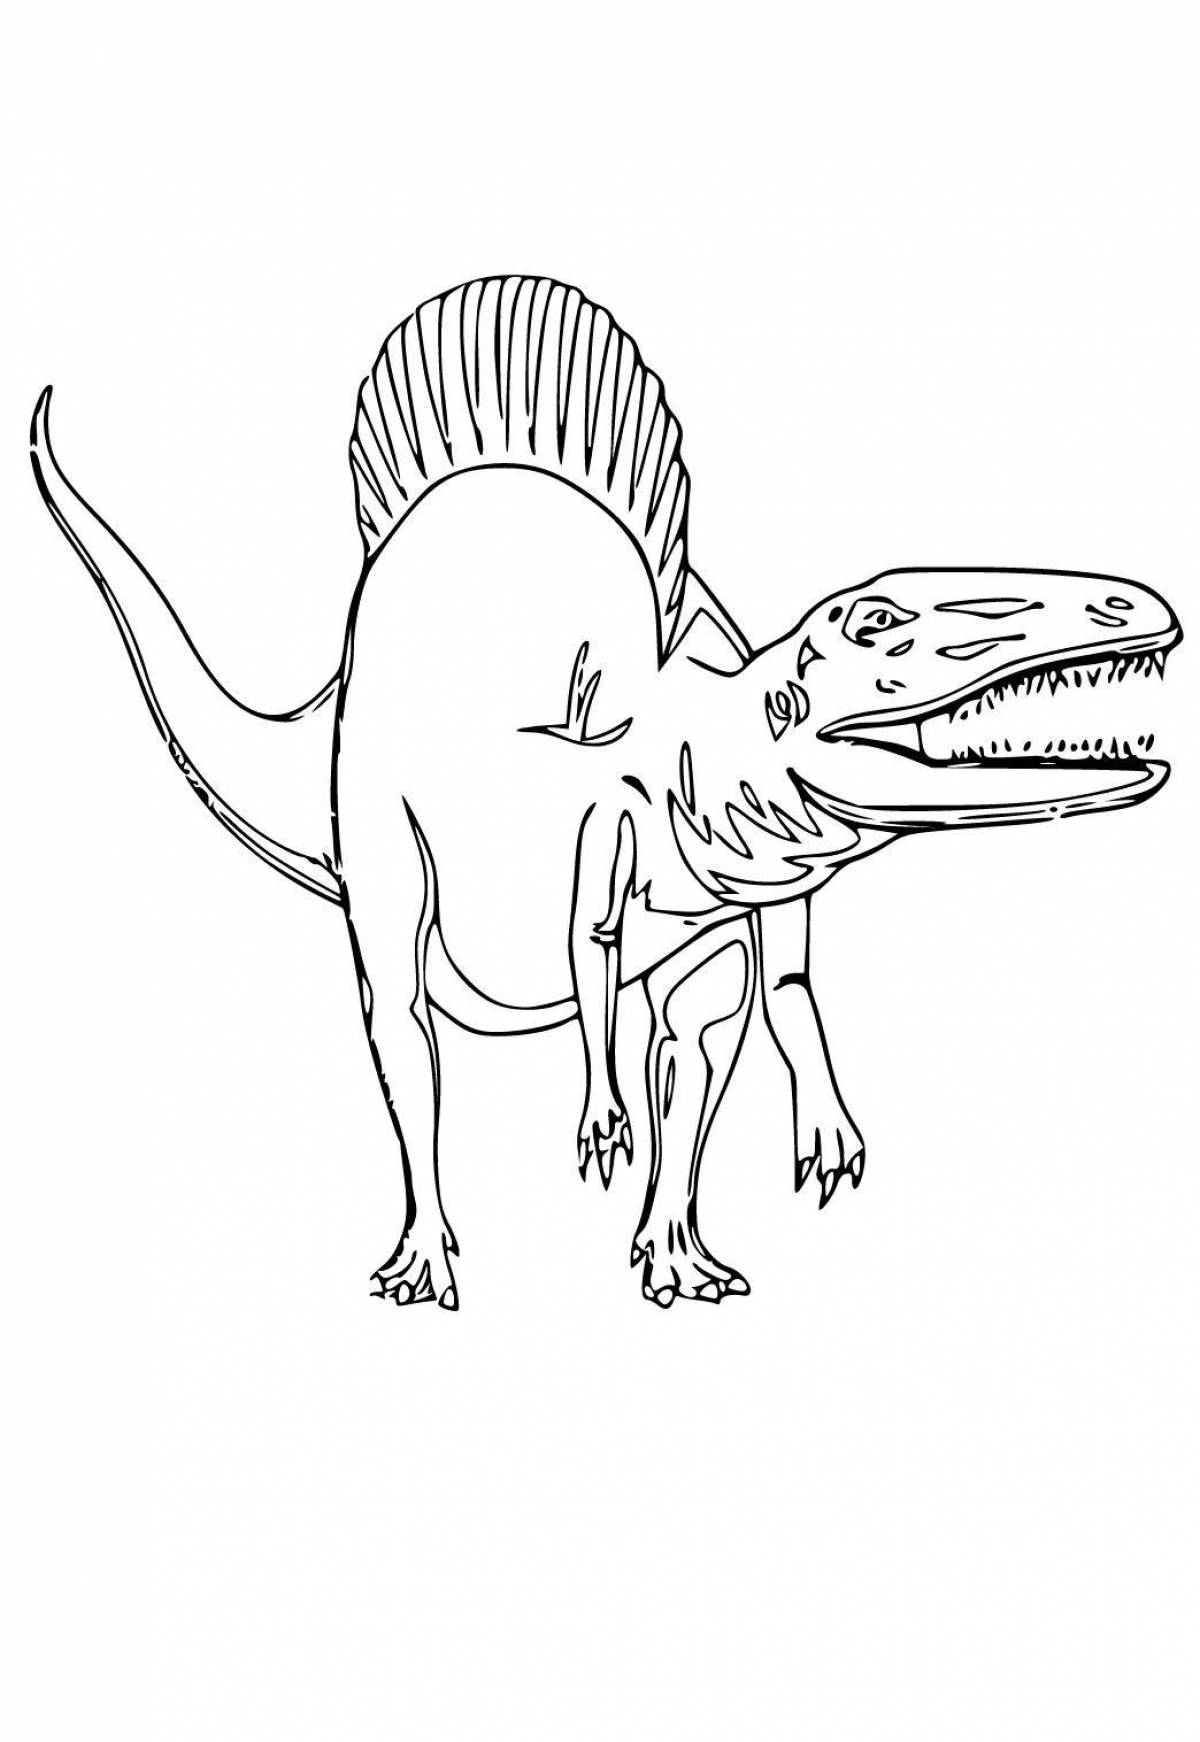 Coloring page dazzling spinosaurus